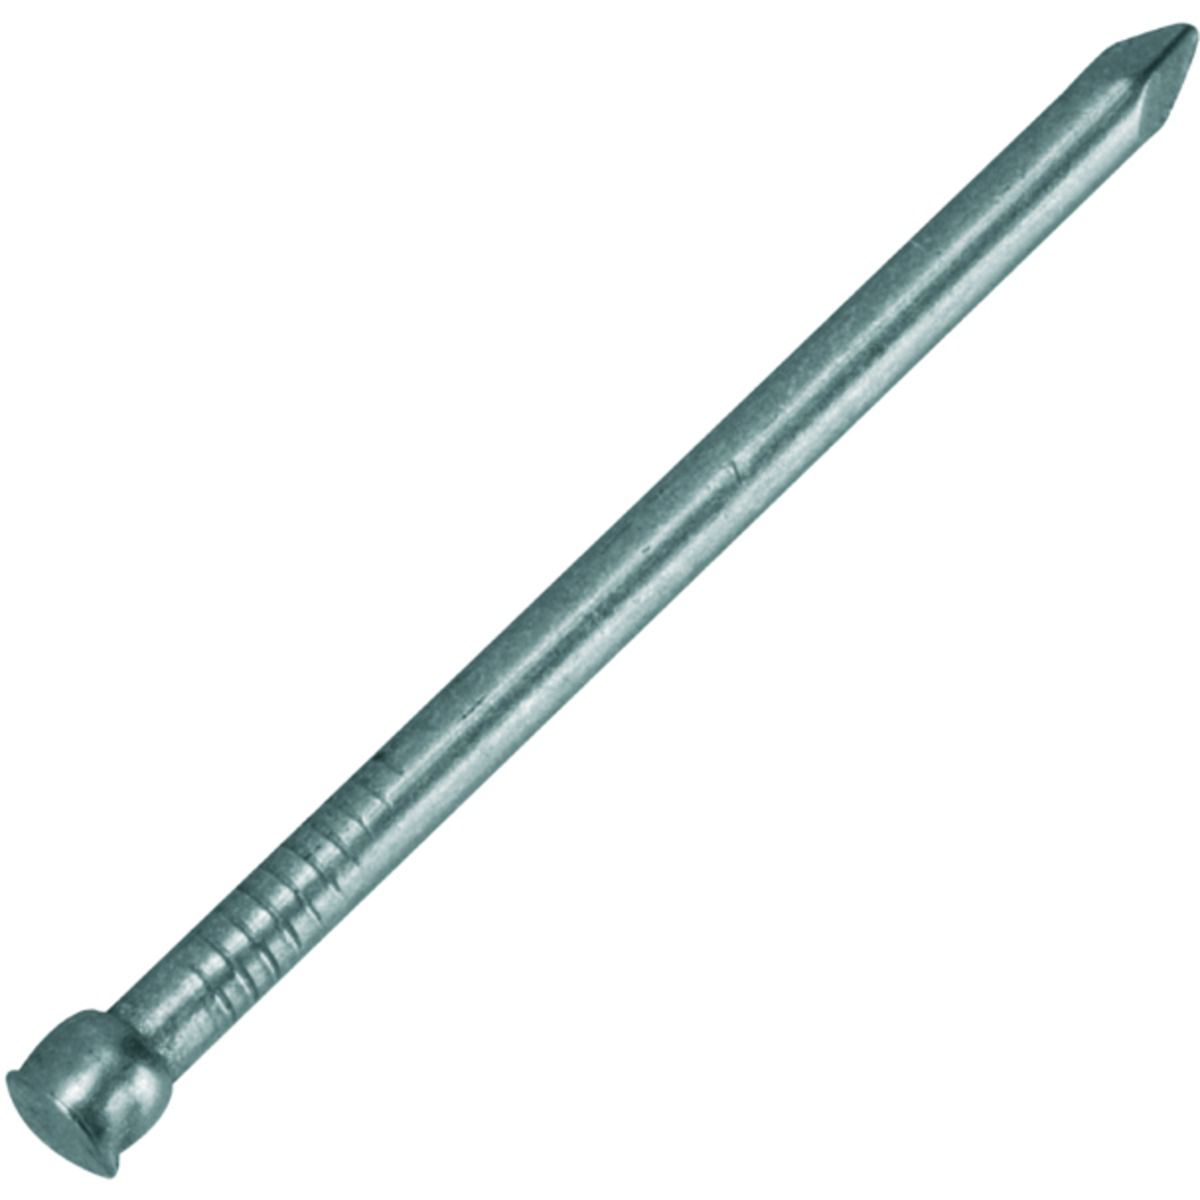 Image of Wickes 50mm Bright Lost Head Nails - 400g